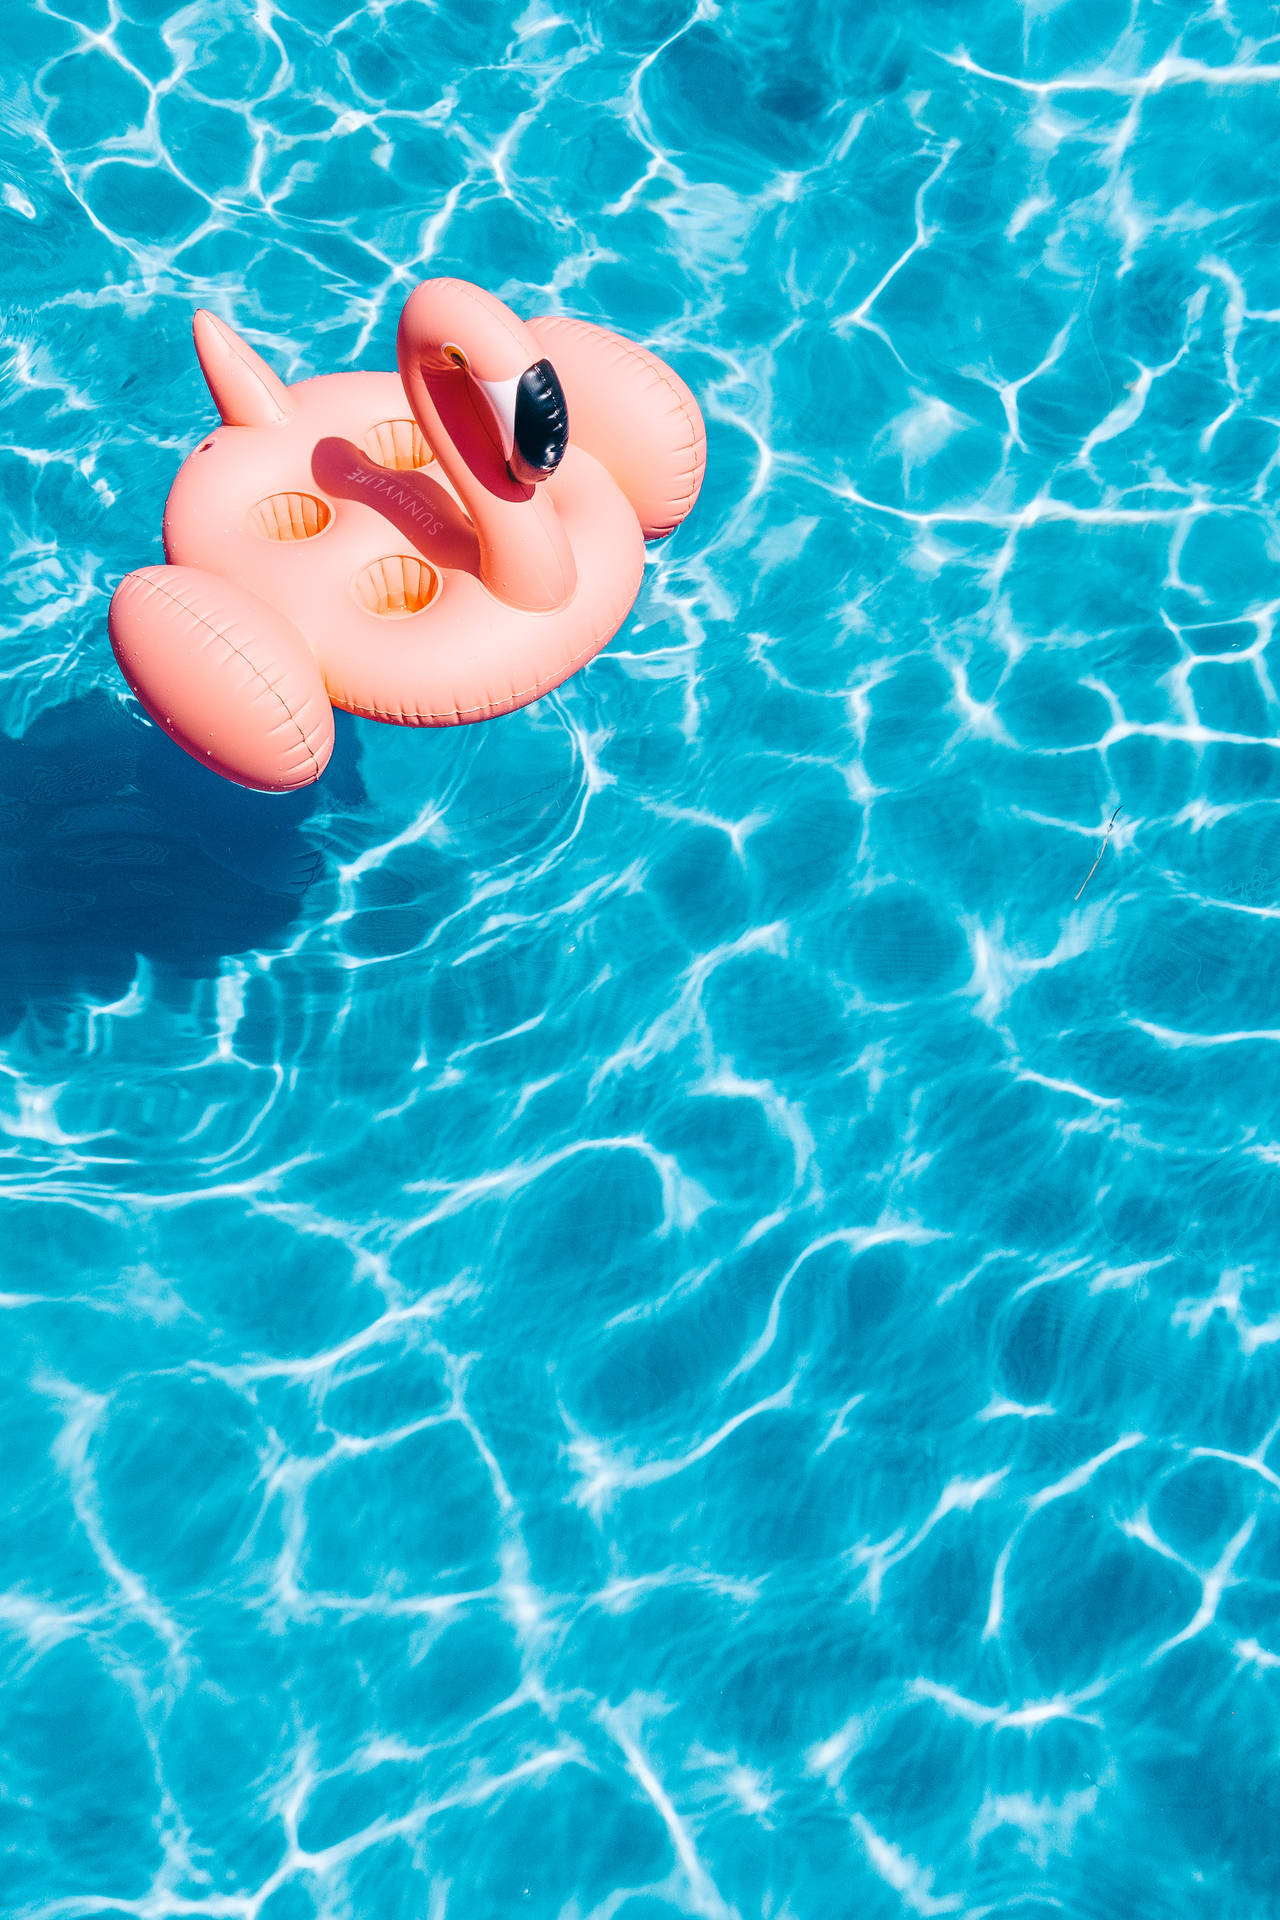 Enjoy the Summer Fun by Floating in a Giant Inflatable Flamingo Wallpaper